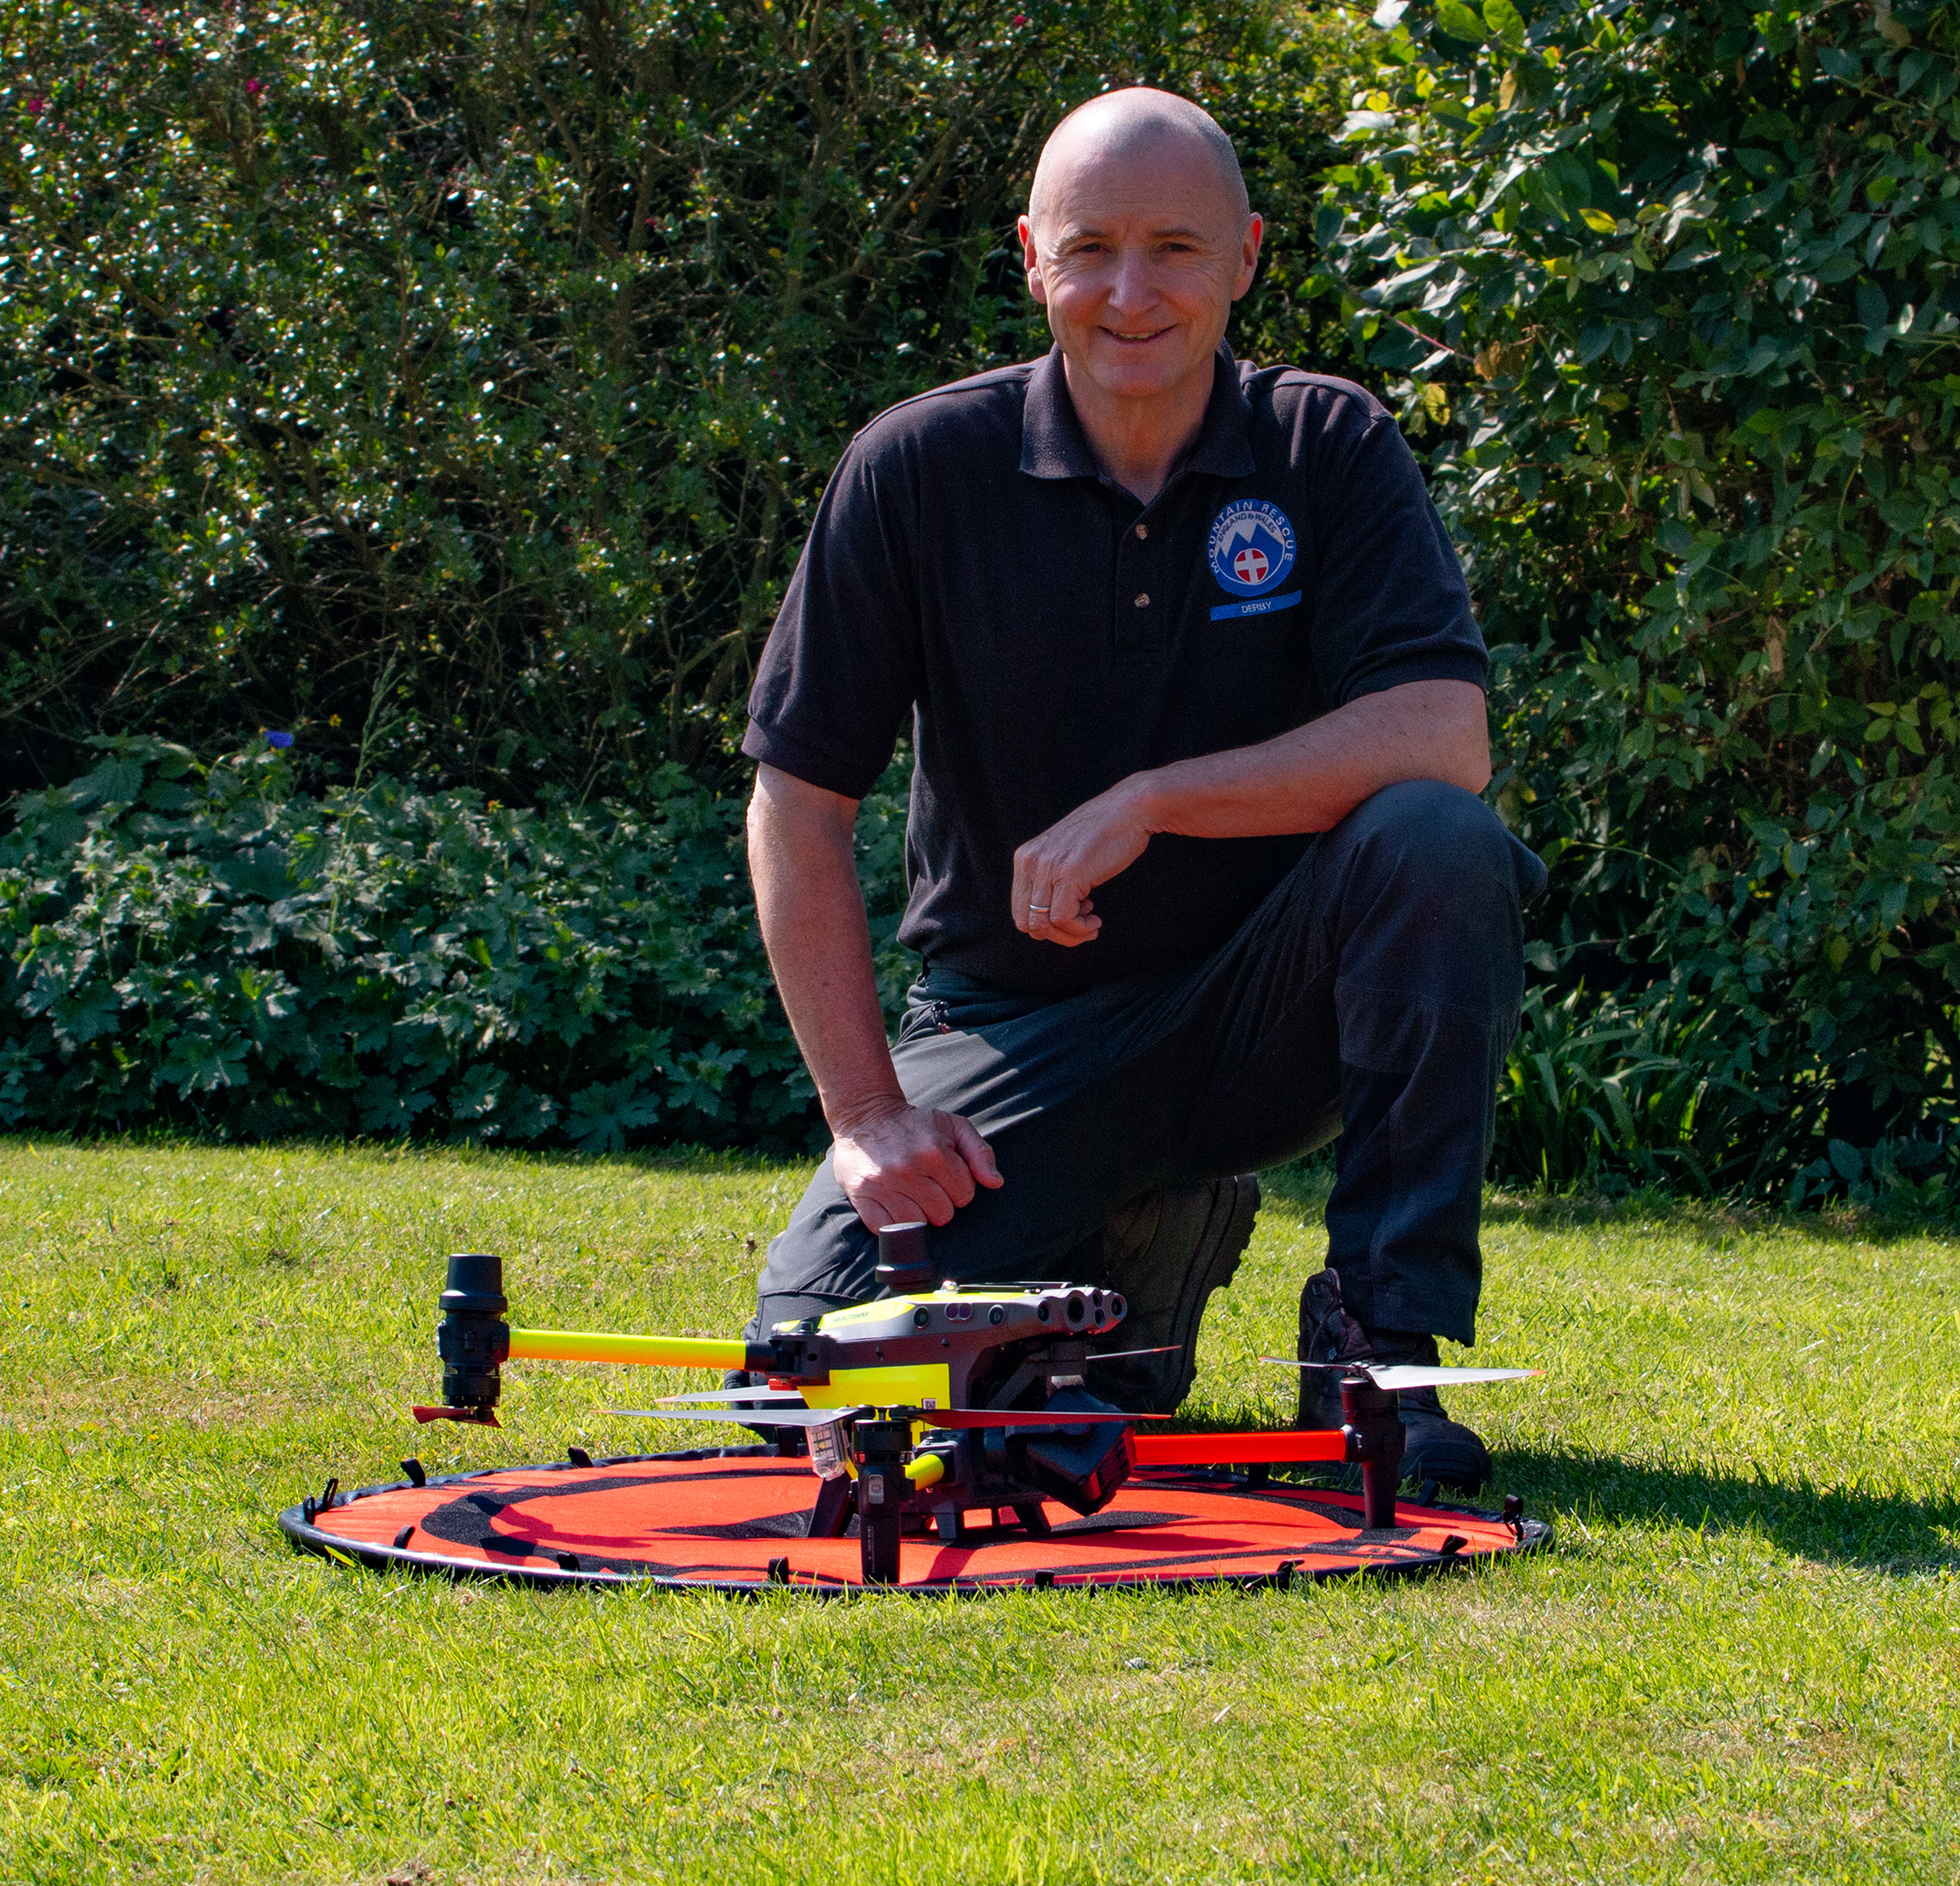 Brendan O'Neill preparing the DJI M30T drone for take off at the training site on the edge of the Peak District